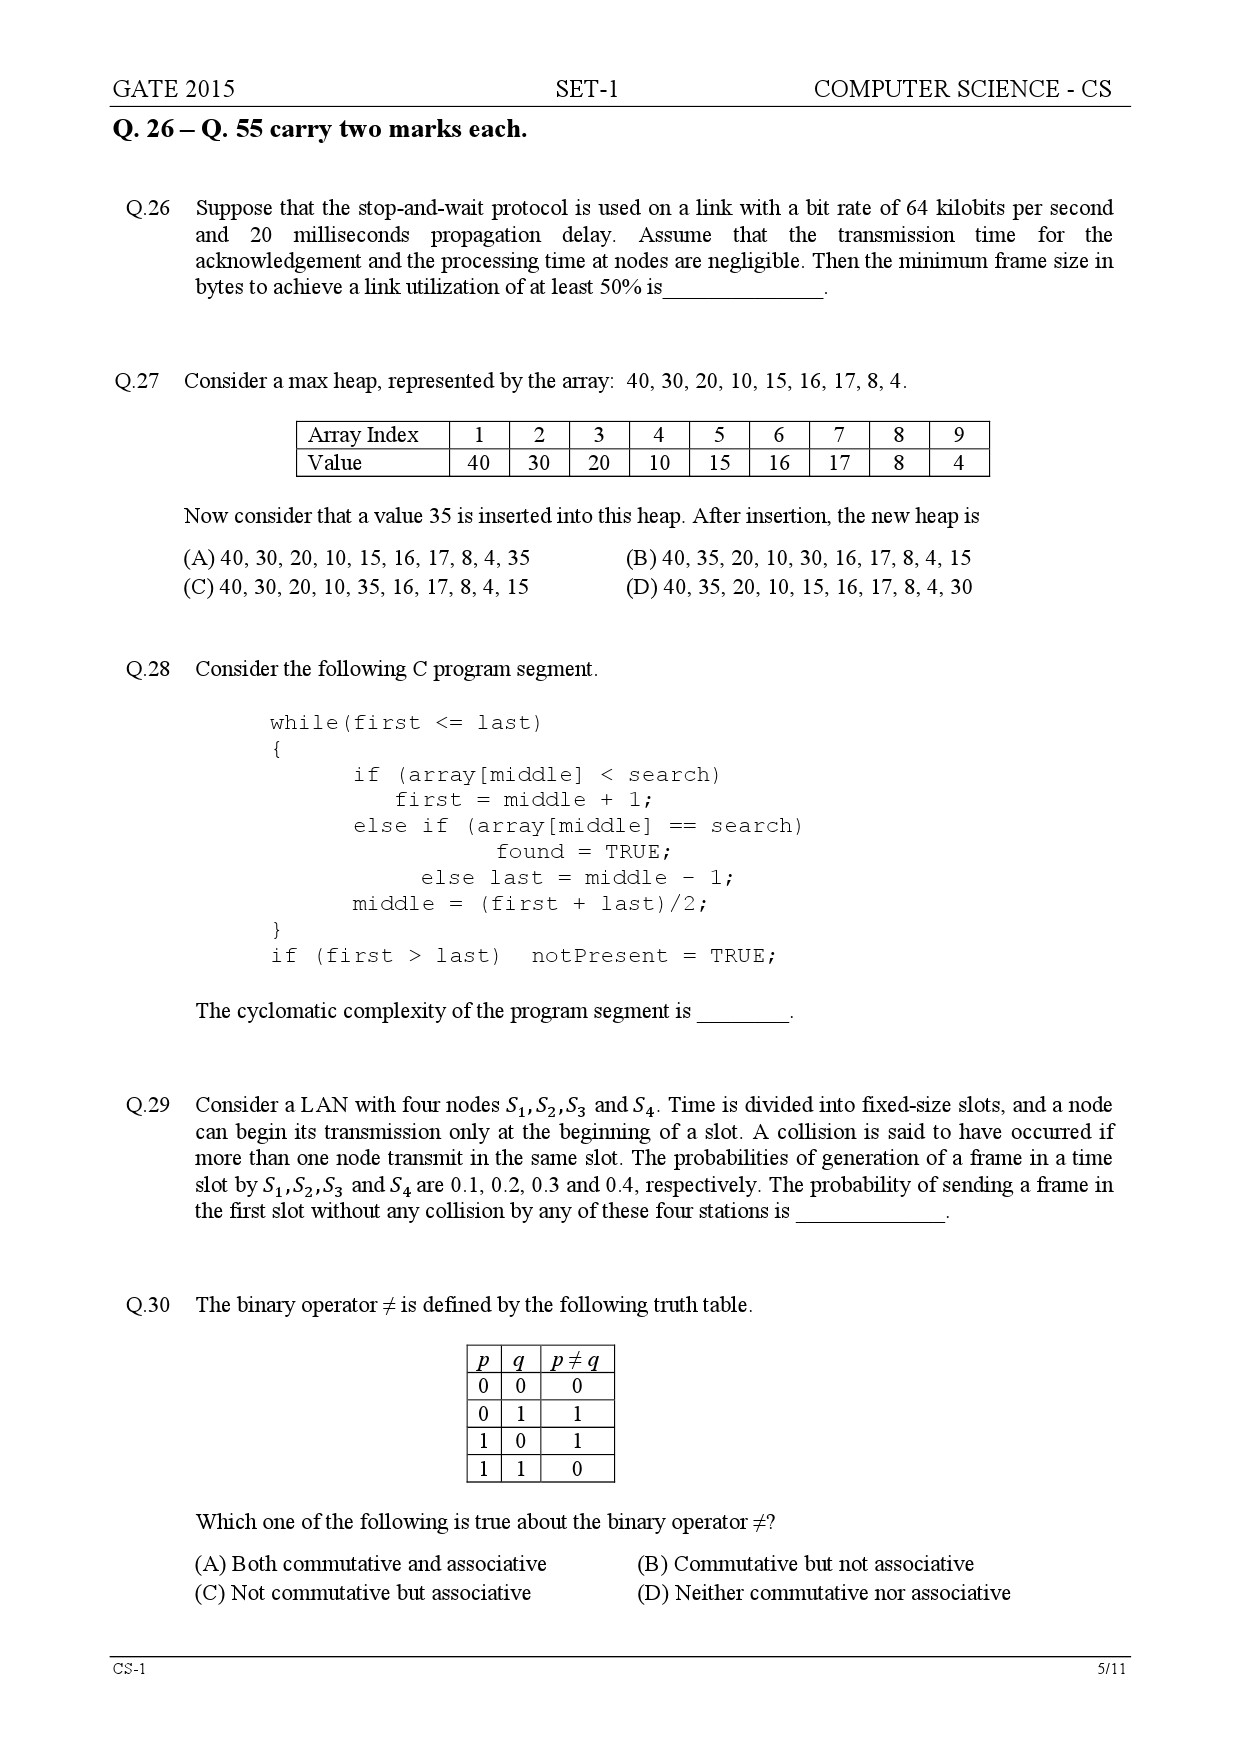 GATE Exam Question Paper 2015 Computer Science and Information Technology Set 1 5